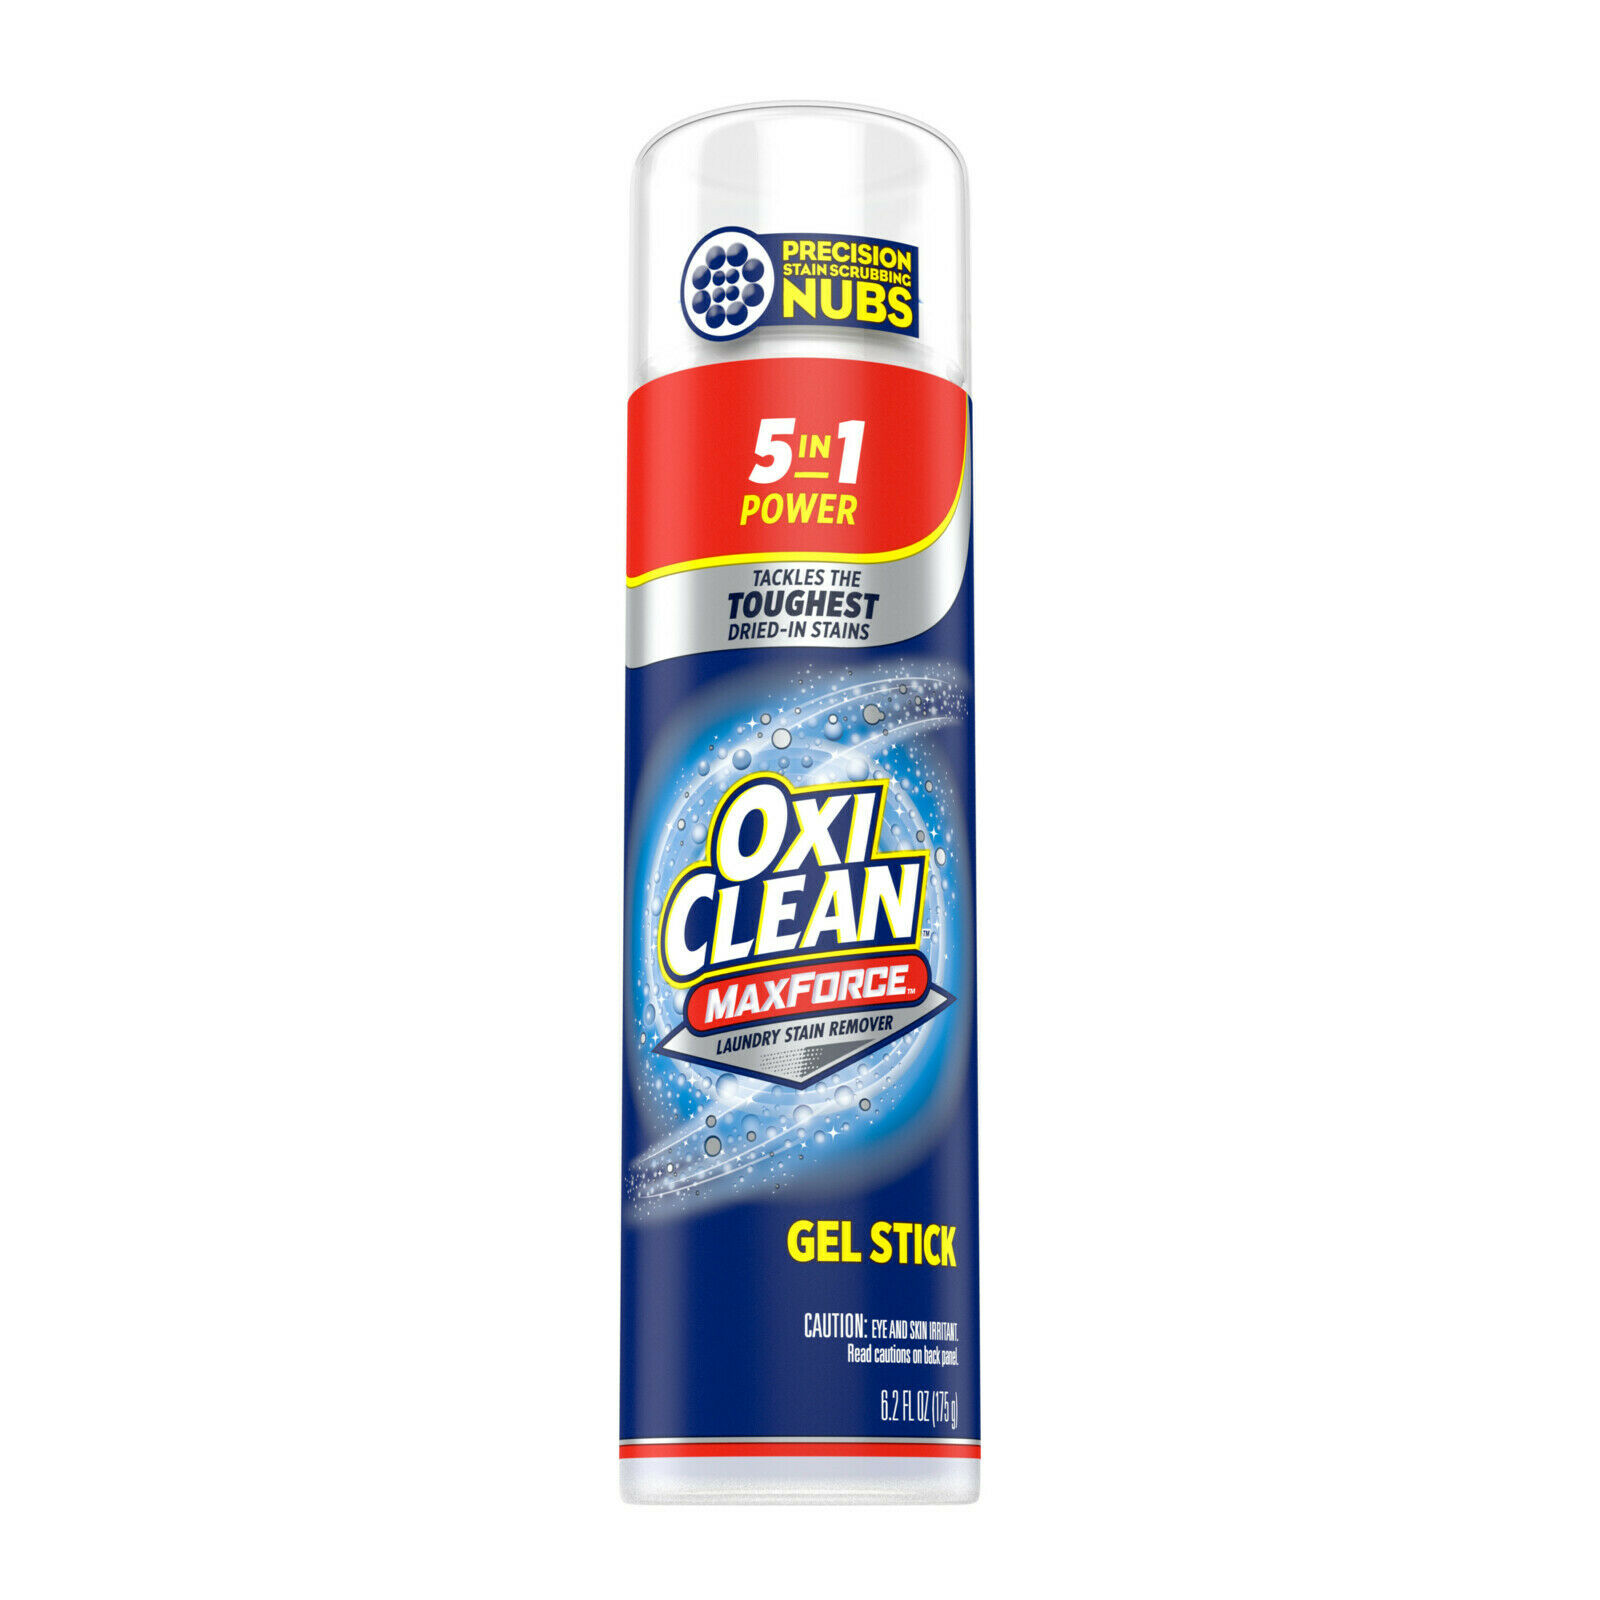 OxiClean MaxForce Gel Stain Remover Stick, 5 in 1 Power Spot Remover for Clothes